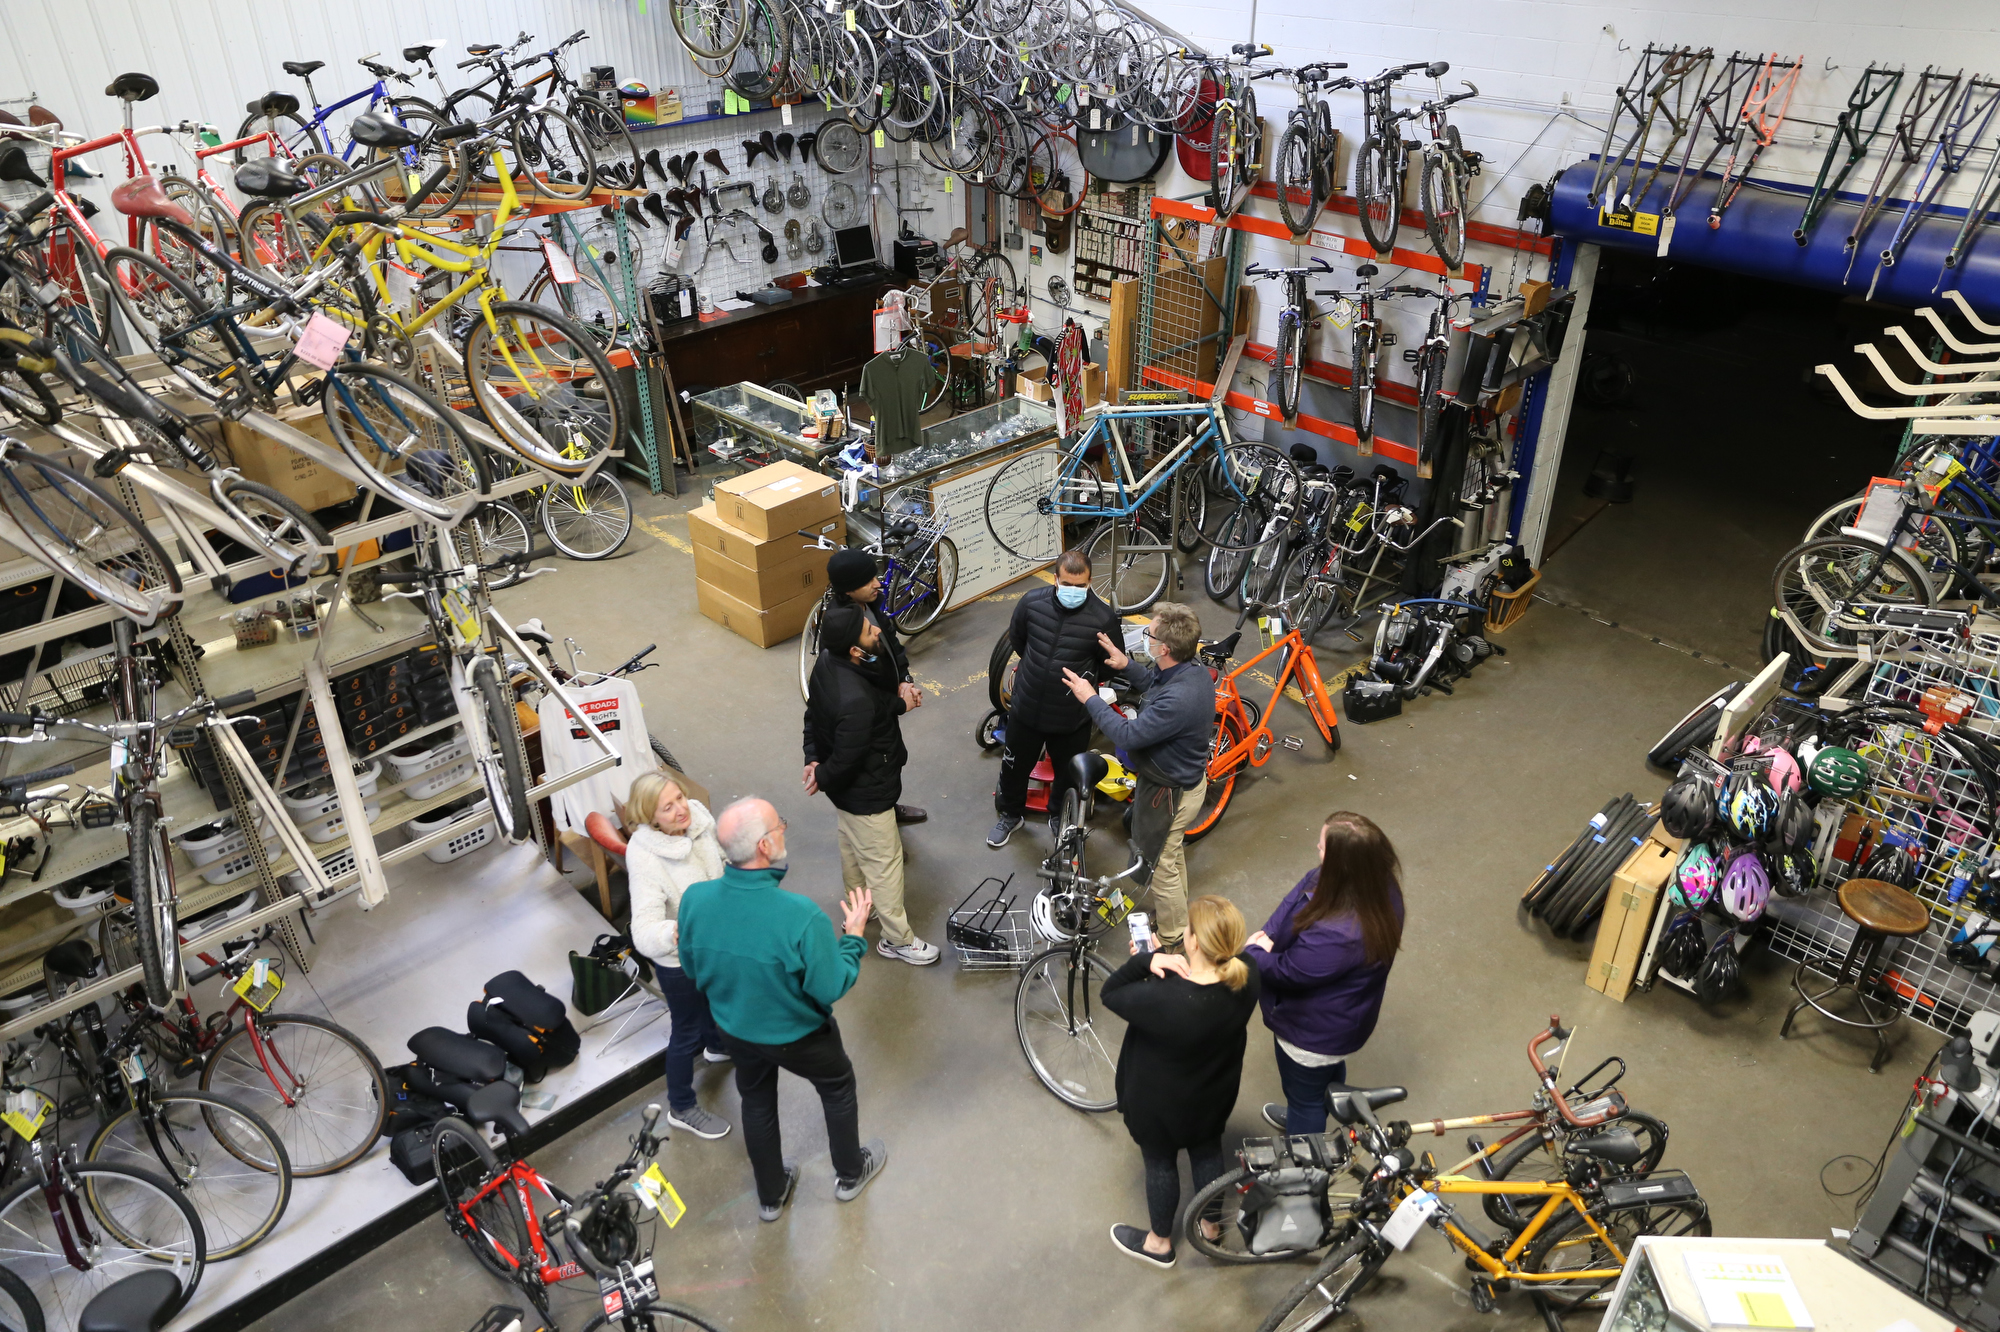 Best Bike shops in Greater Cleveland, according to Yelp